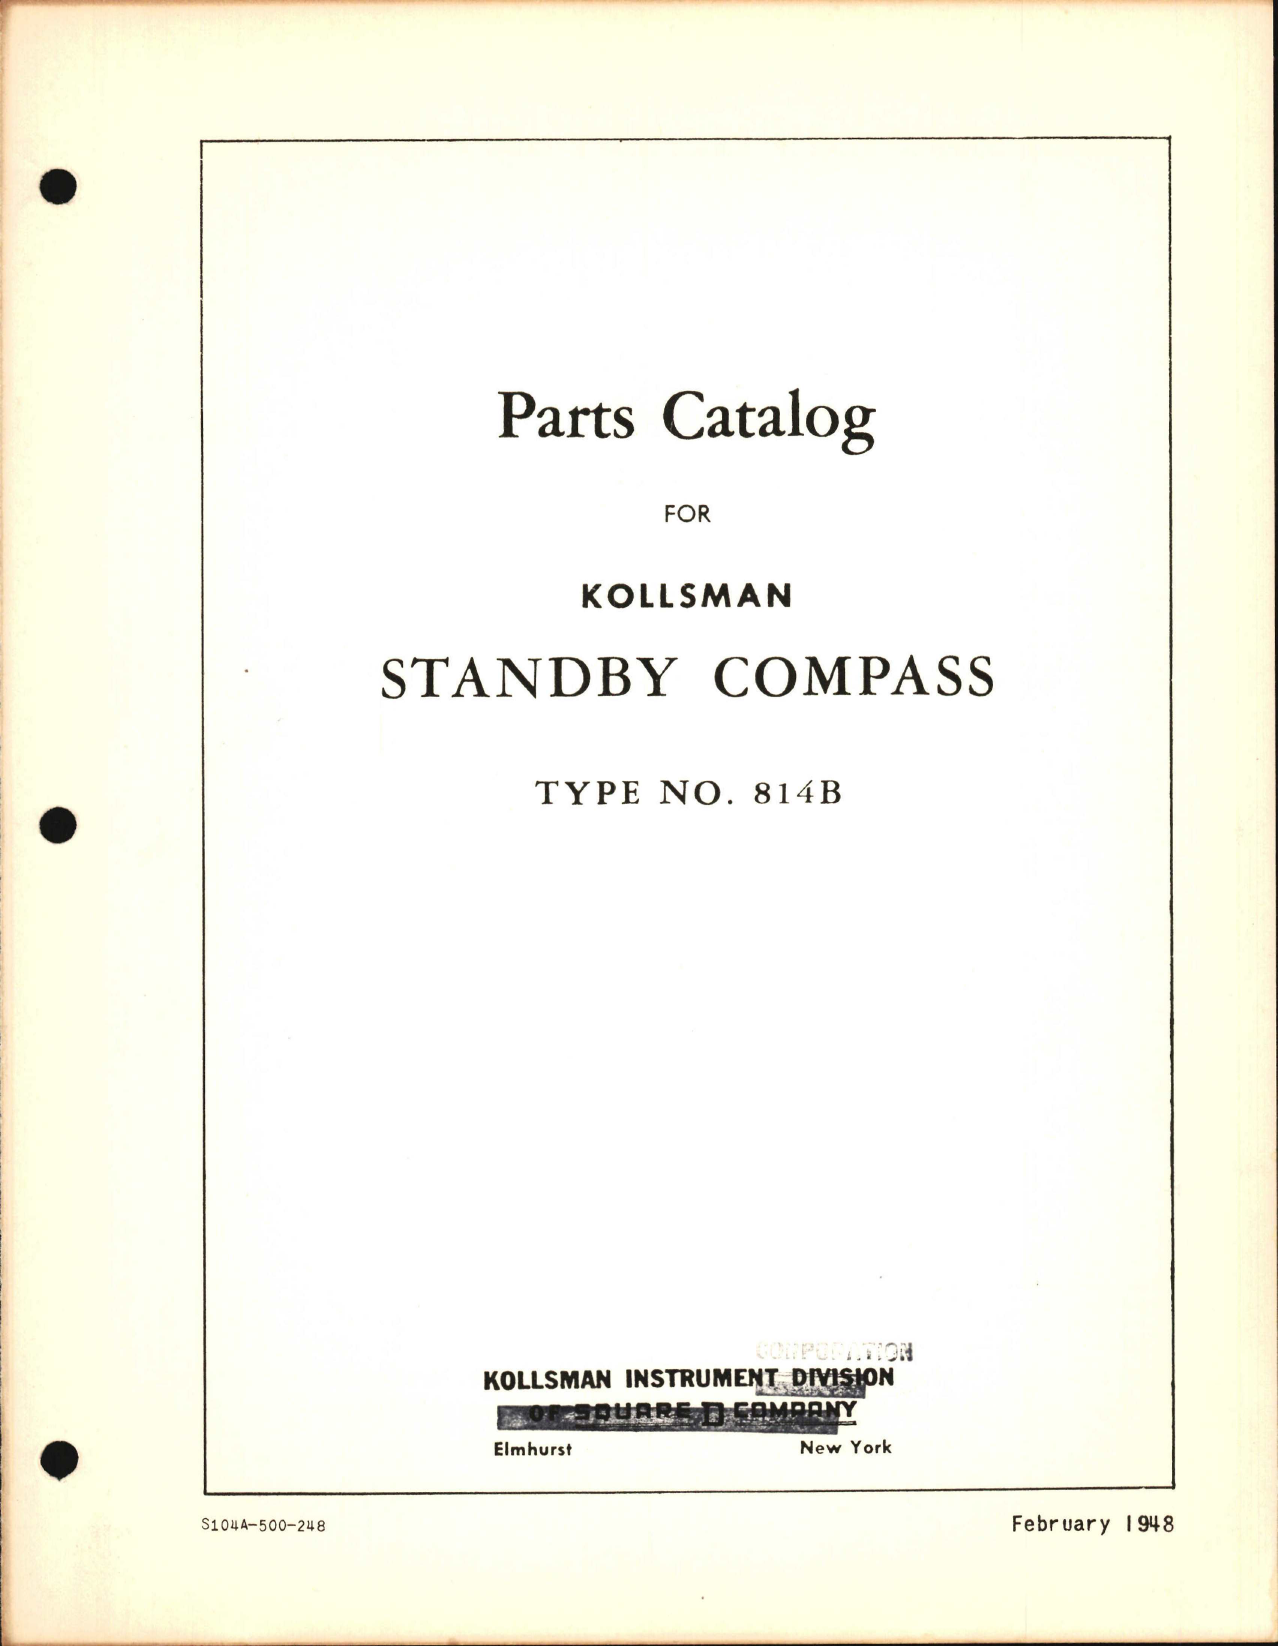 Sample page 1 from AirCorps Library document: Parts Catalog for Kollsmn Standby Compass Type 814B